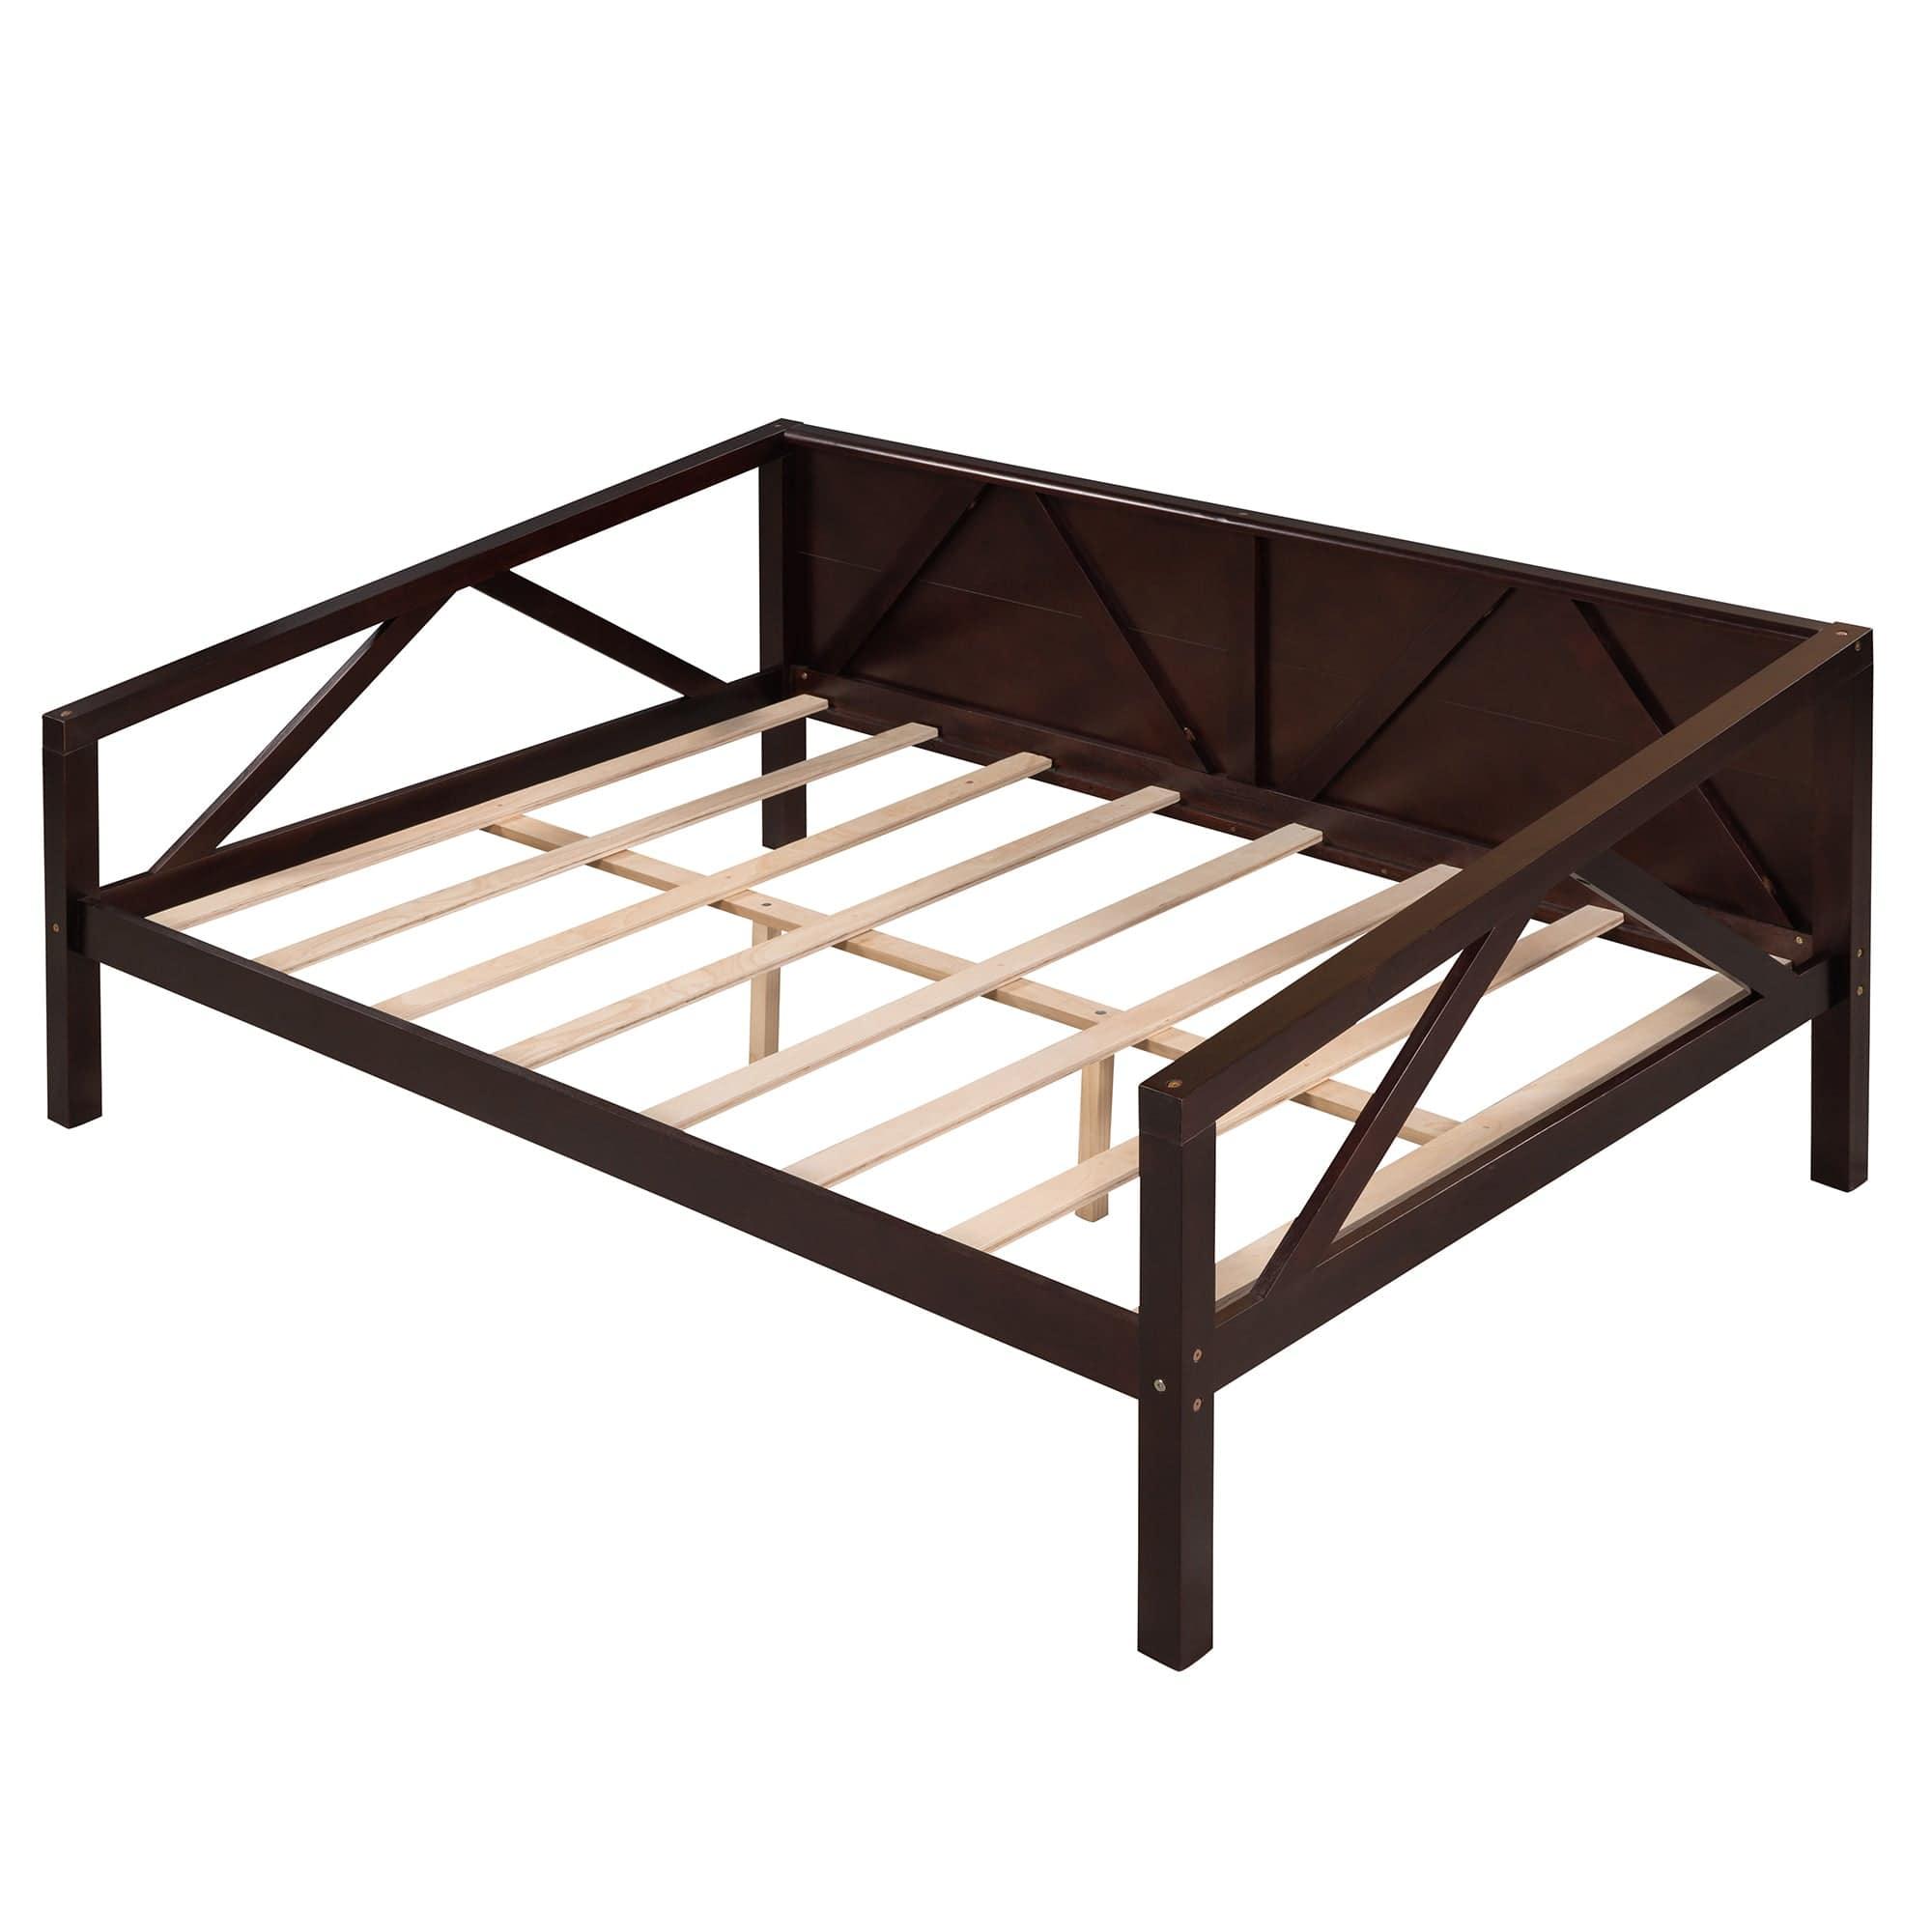 Shop Full size Daybed, Wood Slat Support, Espresso Mademoiselle Home Decor